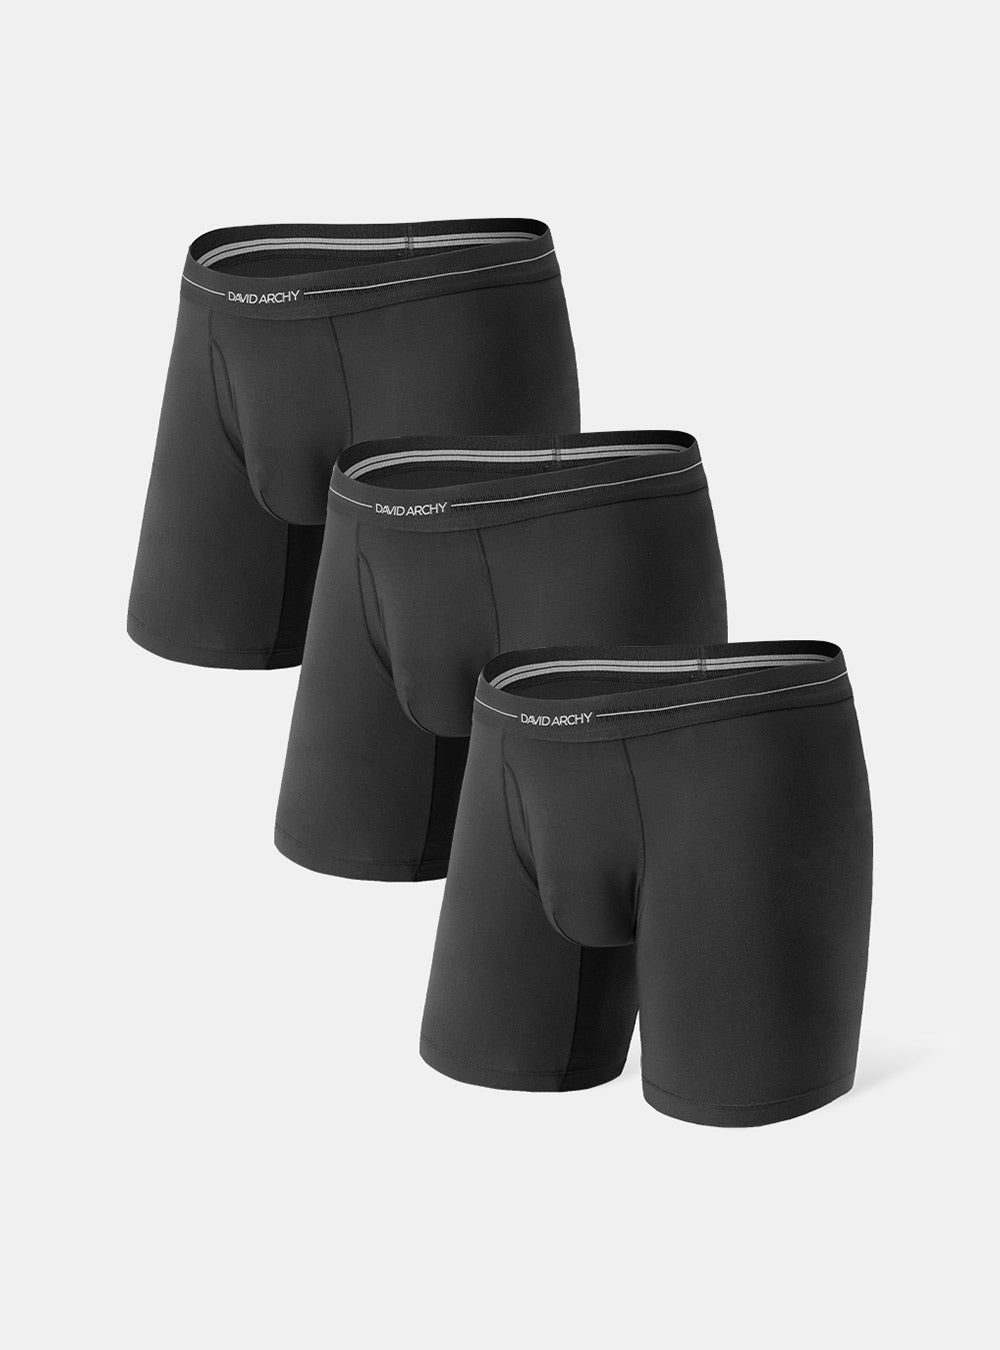 David Archy 3 Packs Cotton Boxer Briefs with Pouch Support Elite